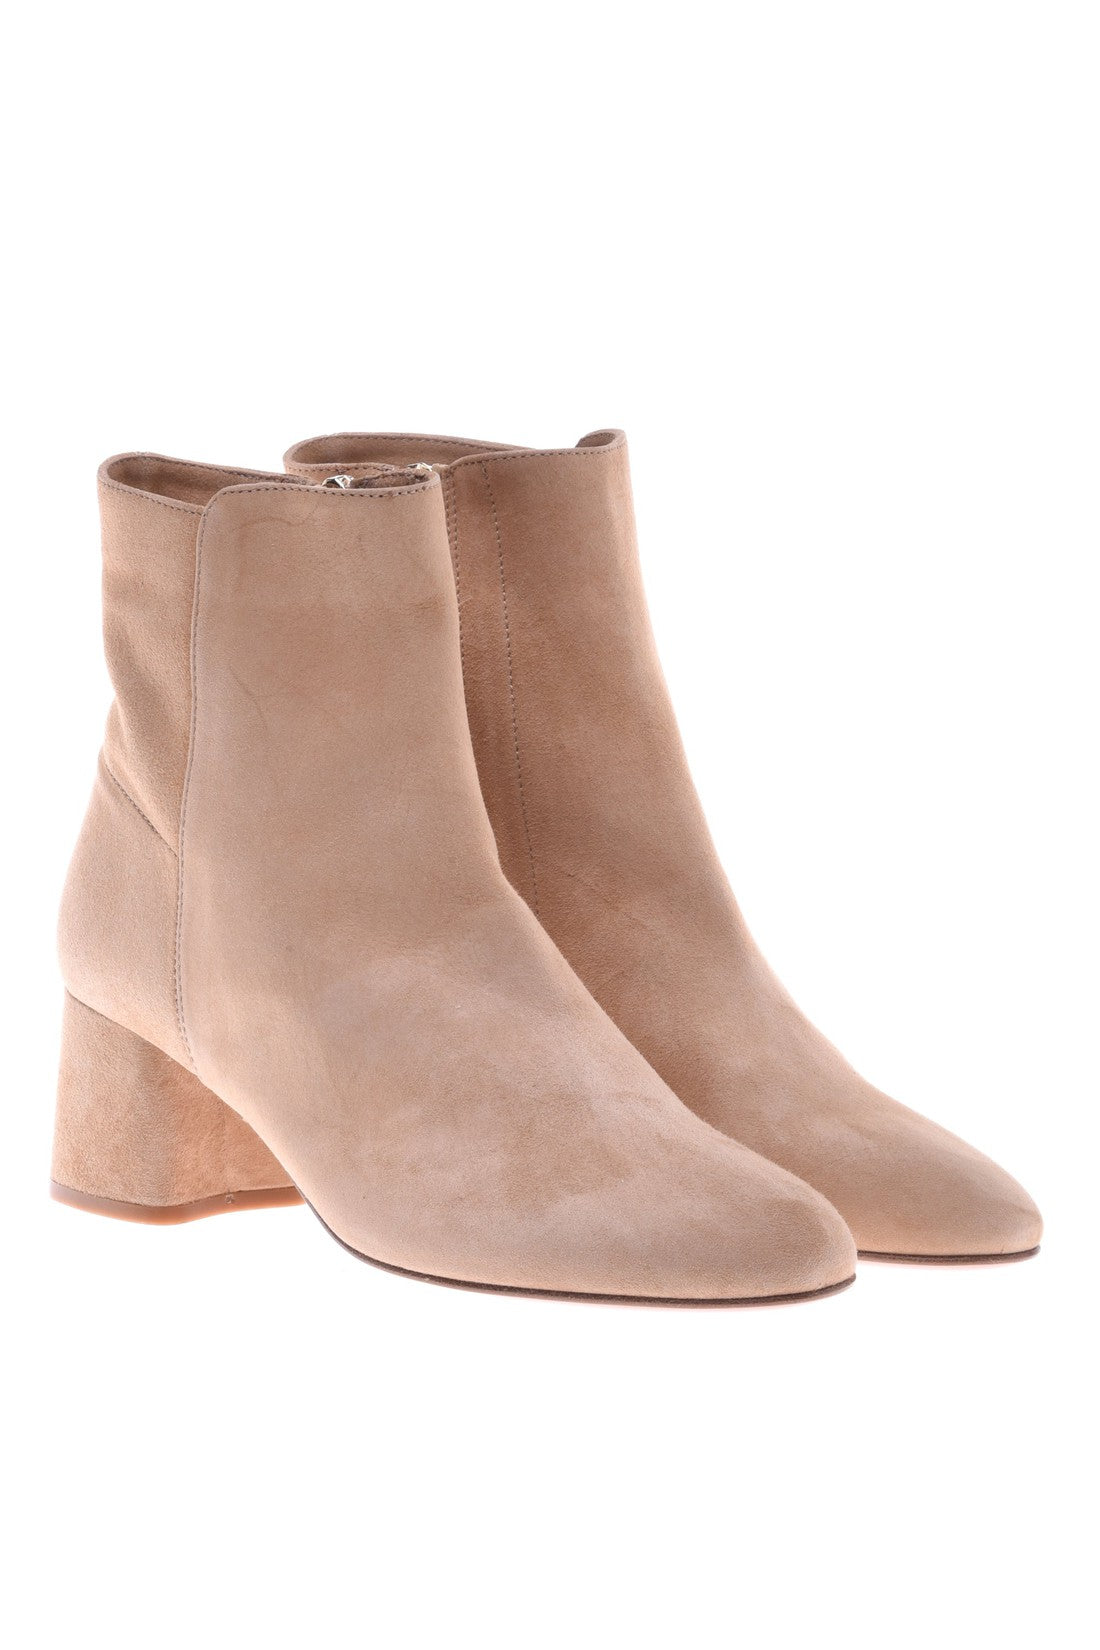 BALDININI-OUTLET-SALE-Ballerina-pump-in-taupe-suede-Stiefel-Stiefeletten-ARCHIVE-COLLECTION-3.jpg